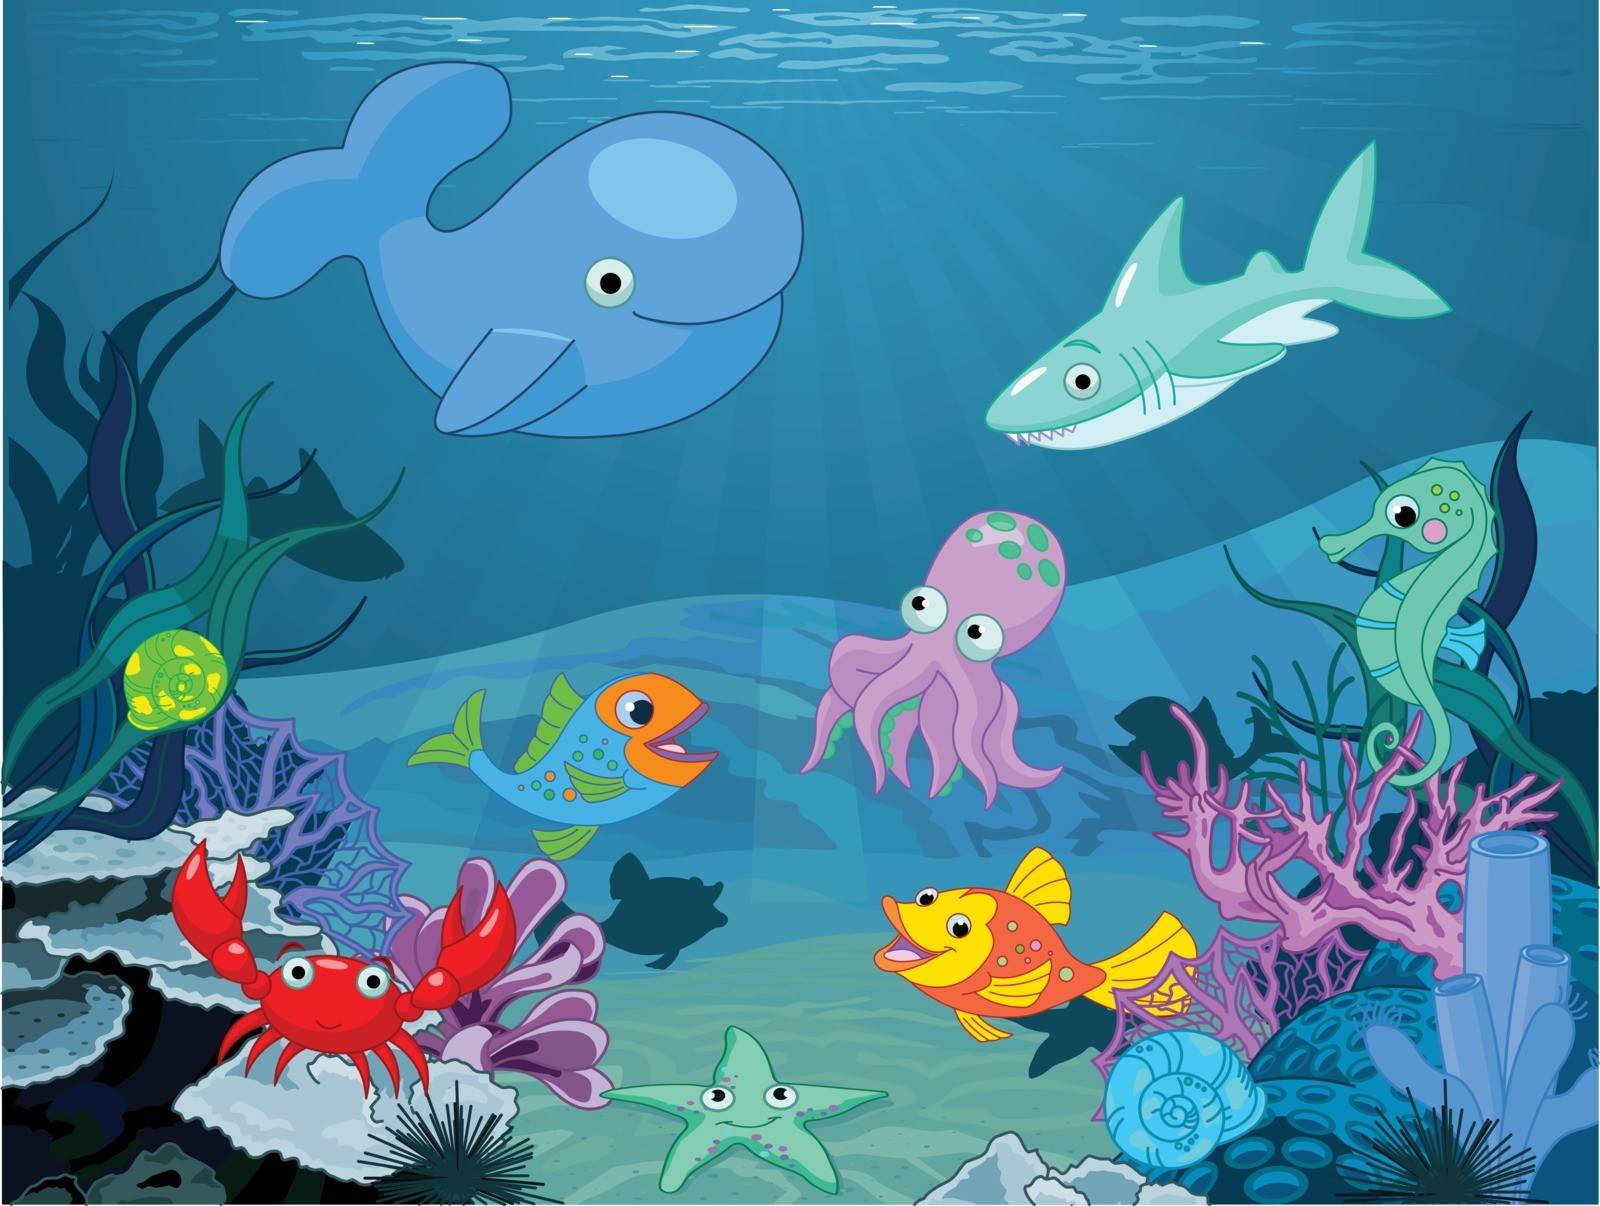 Illustration background of an underwater life